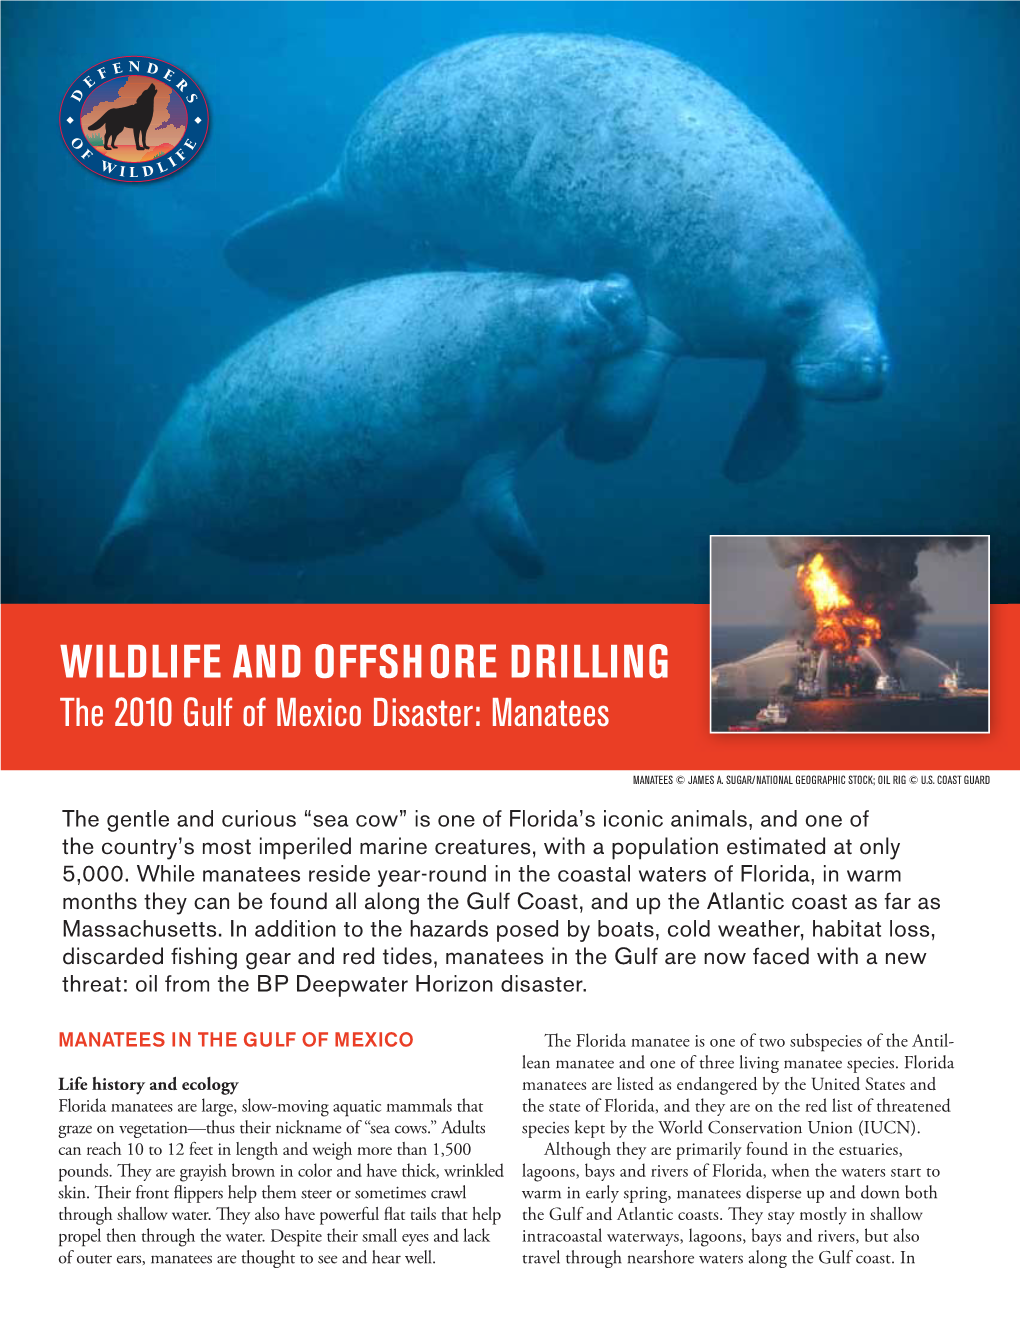 Wildlife and Offshore Drilling the 2010 Gulf of Mexico Disaster: Manatees